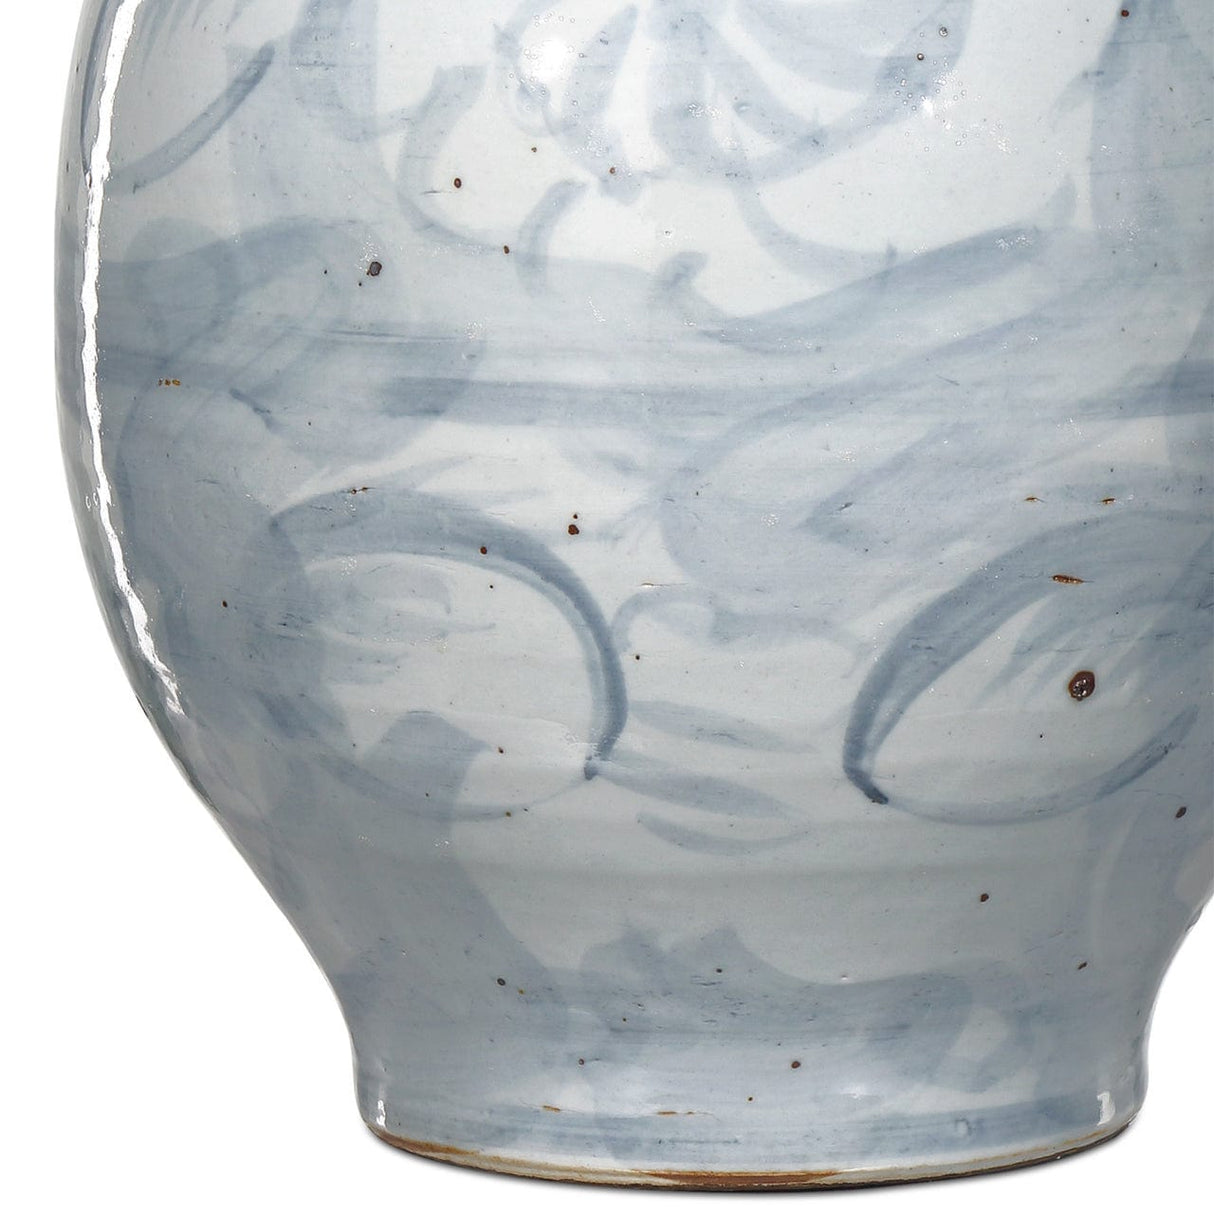 Ming-Style Countryside Preserve Pot Vases